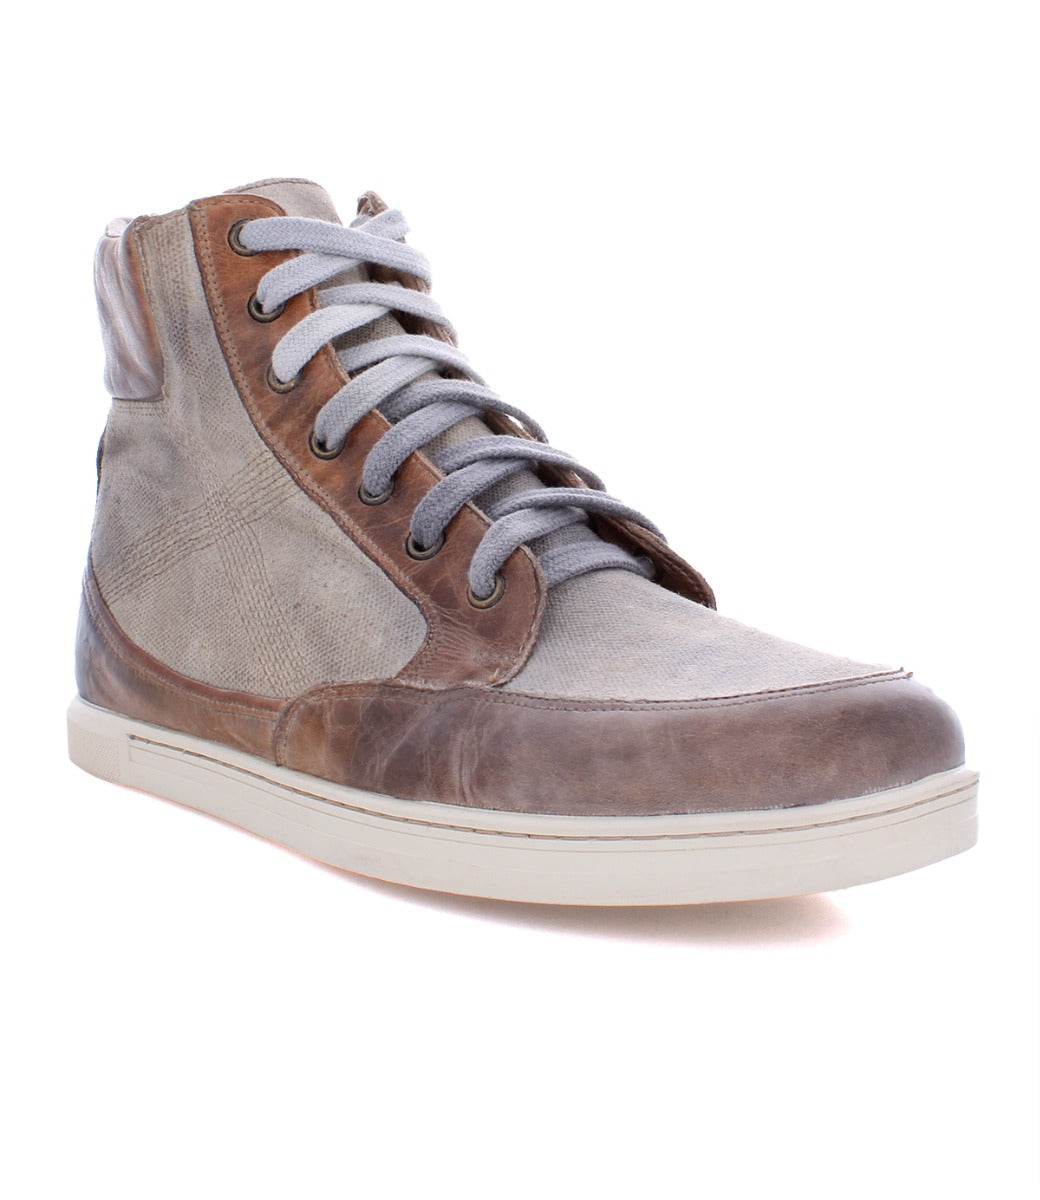 A men's grey and brown Bed Stu Lordmind high top sneaker.